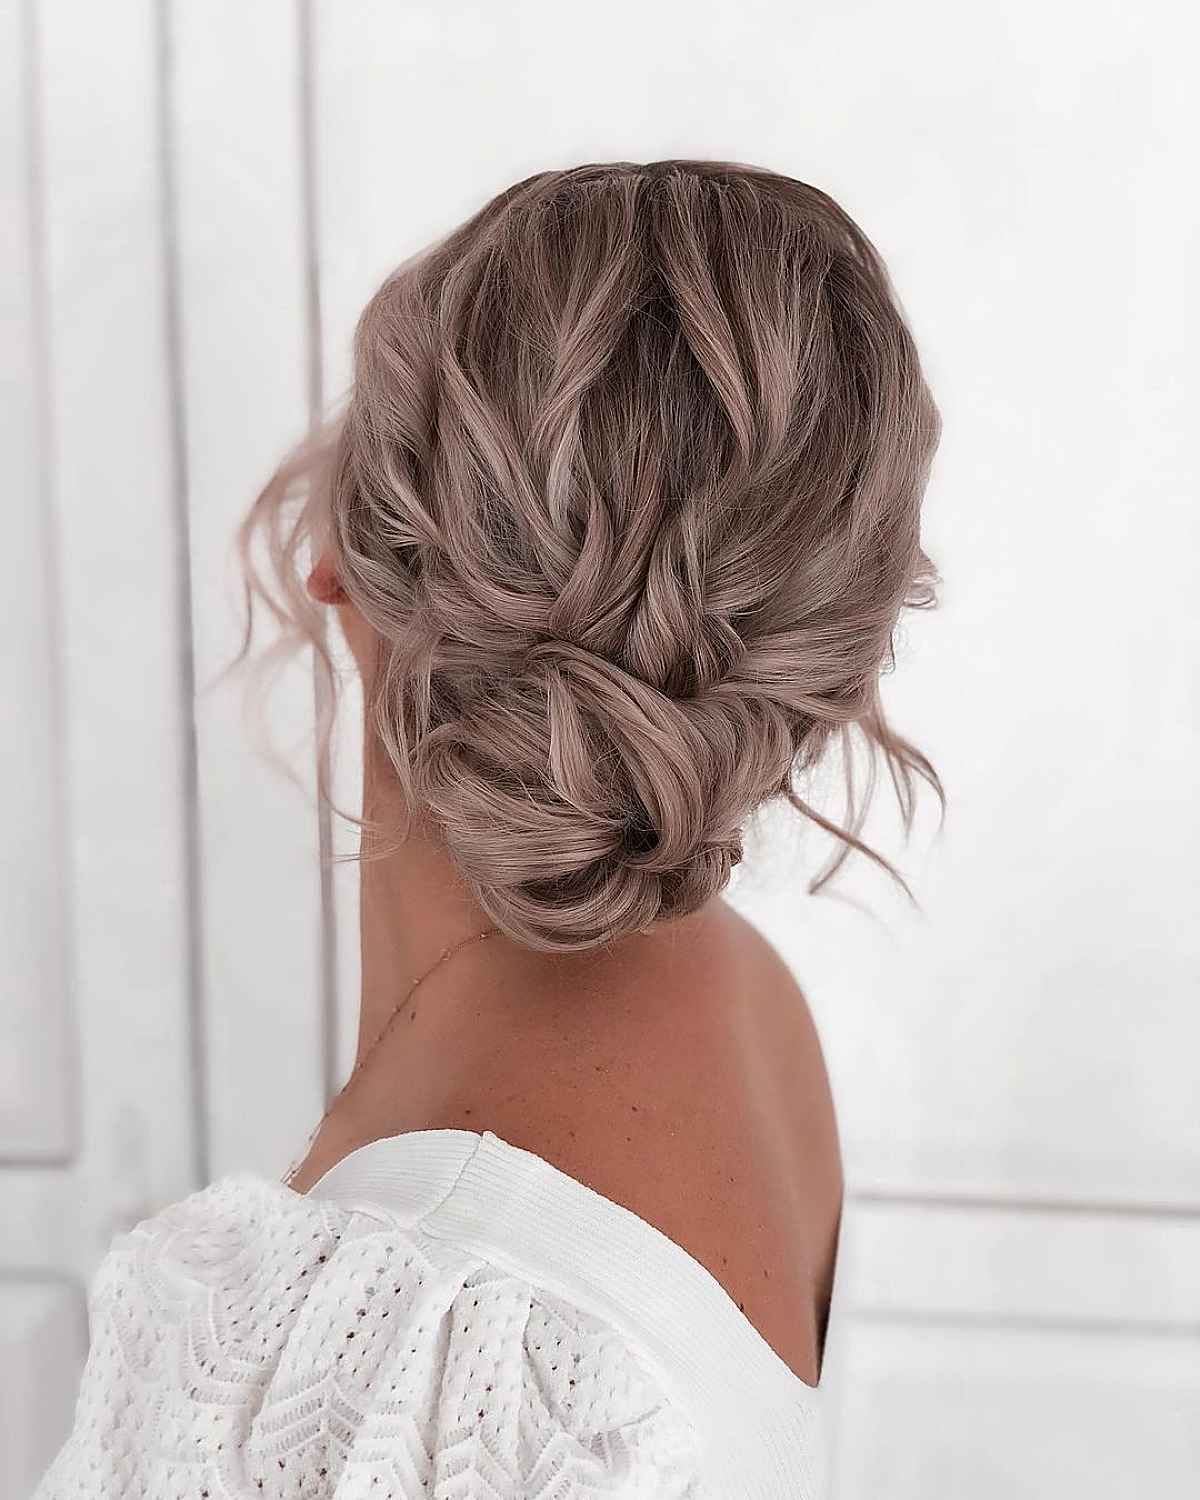 20 Romantic Bun Hairstyles For Prom That Are Easy To Do Throughout Low Formal Bun Updo (View 11 of 25)